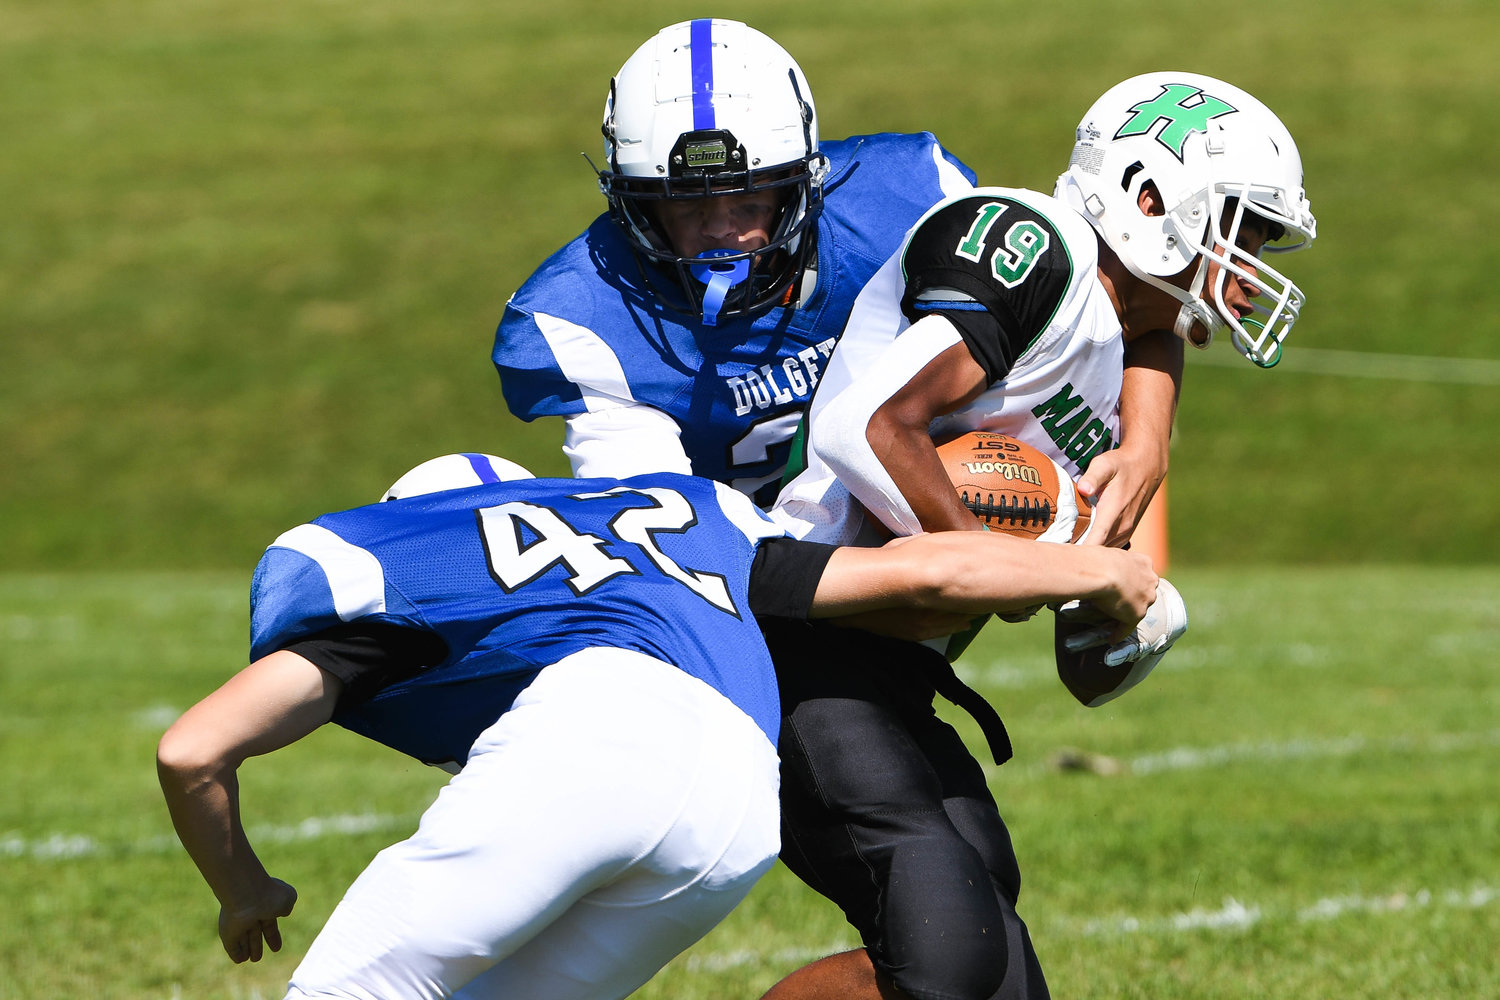 Herkimer returner Terrance Jones (19) is tackled by Dolgeville players Trever Borst and Grayson Eggleston (42) during the Class D game on Saturday. The Blue Devils won 68-20.